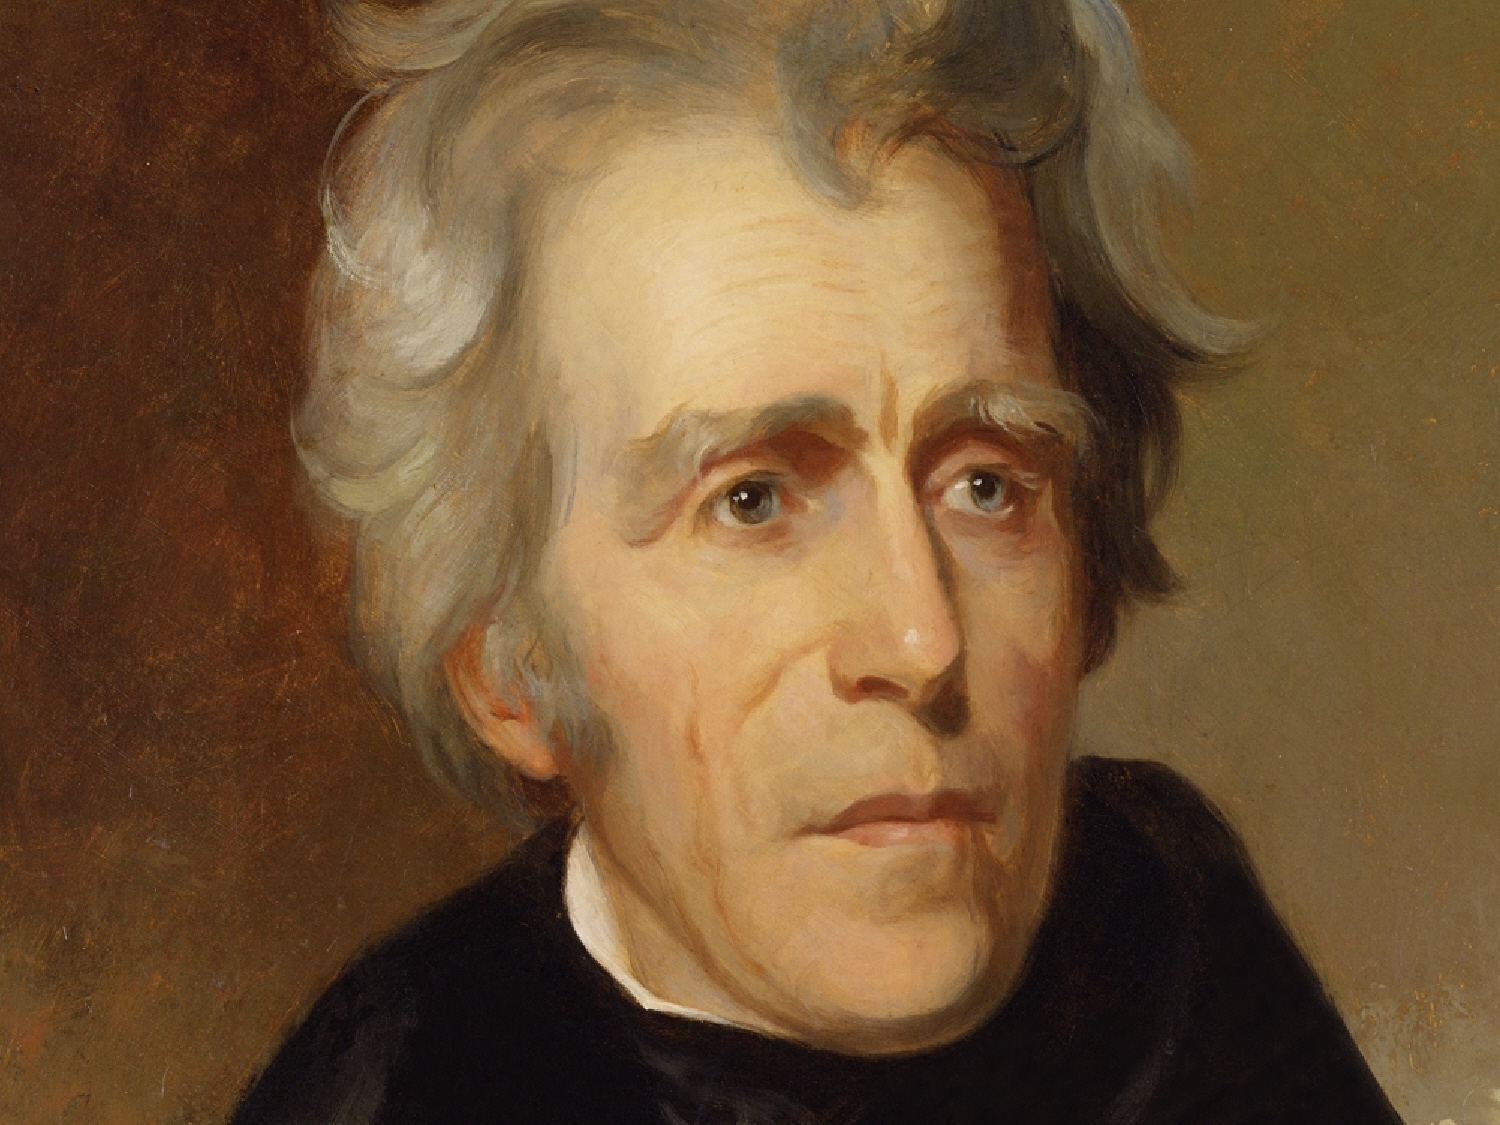 In 1835 an unemployed house painter named Richard Lawrence tried to assassinate then President of the USA Andrew Jackson. He produced a pistol and fired at Jackson, but the gun did not go off. A scuffle ensued, with the 67-year-old Jackson beating the offender with his walking cane. Lawrence then pulled out a second pistol and fired, but this gun also did not go off and bystanders wrestled him to the ground. Both guns were later test fired successfully on the first try and appeared to be in fine working condition